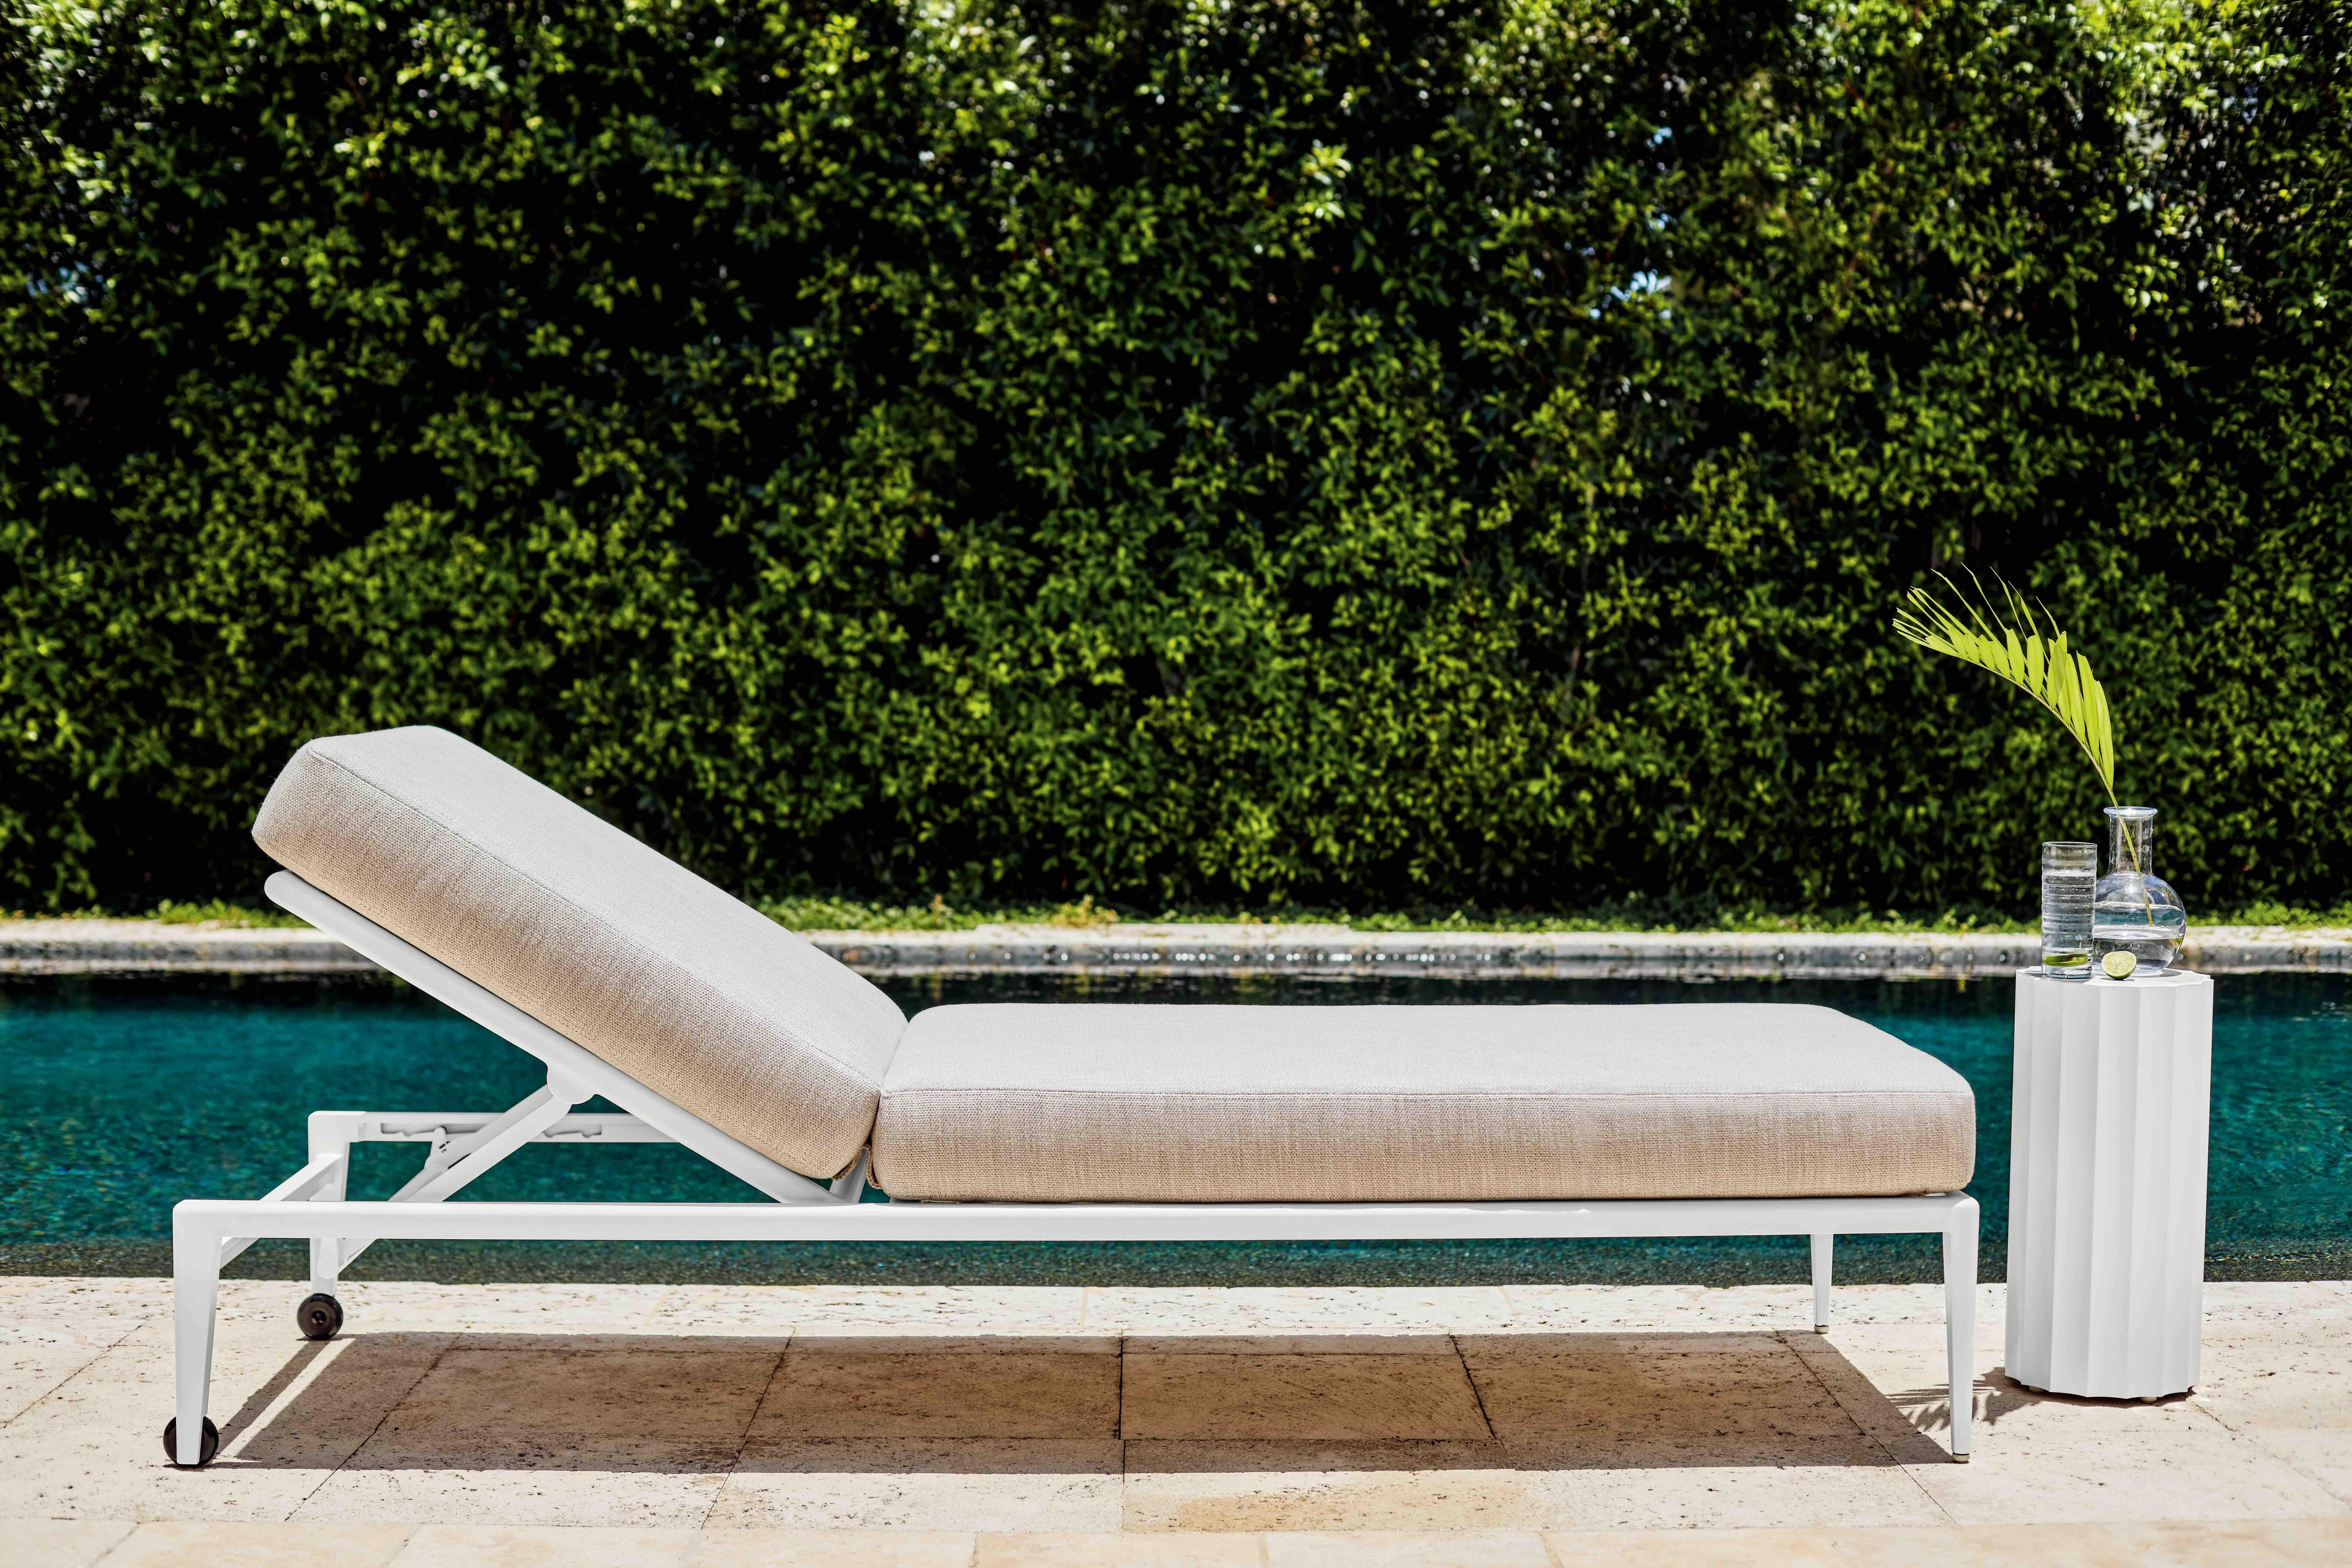 The deCamp Sun Chaise radiates glamour and a casual modernist vibe. The round lines, subtle turns, and transitions are details requiring exacting precision and the workshop’s highest level of hand finishing. The culmination of years of experience in